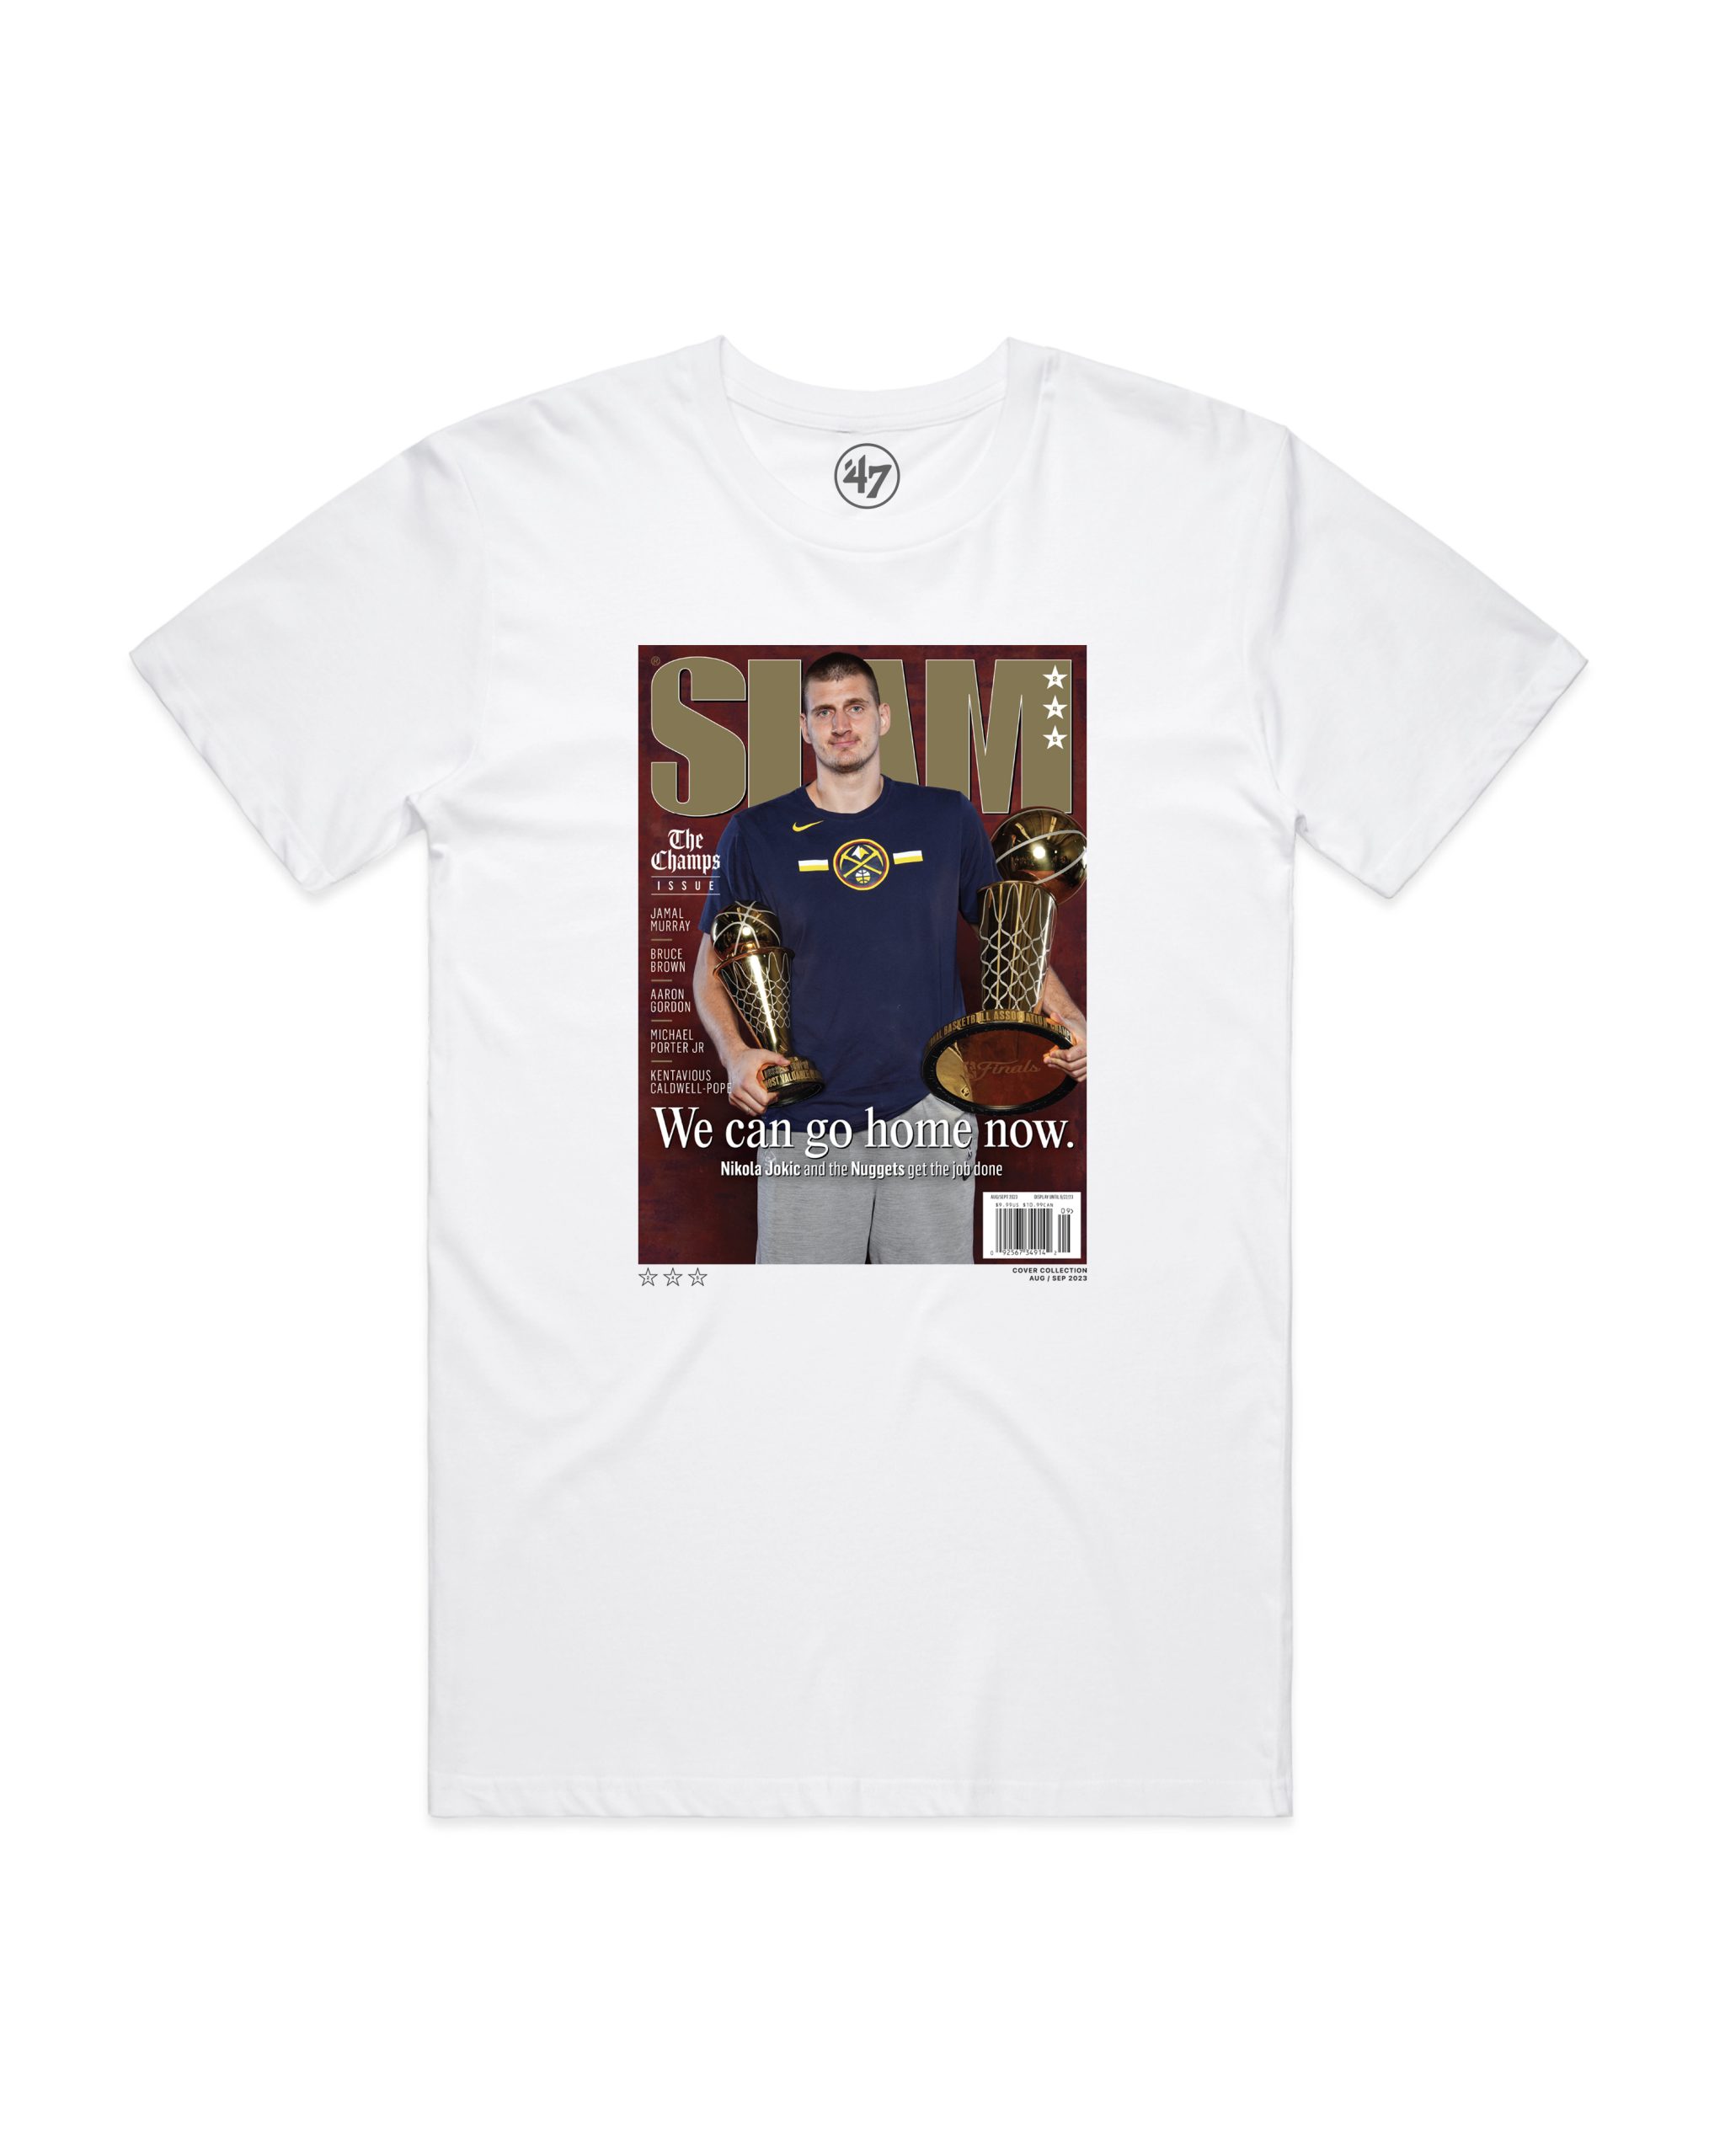 Nikola Jokic Covers SLAM 245: Gold Metal Editions, Cover Tees and More